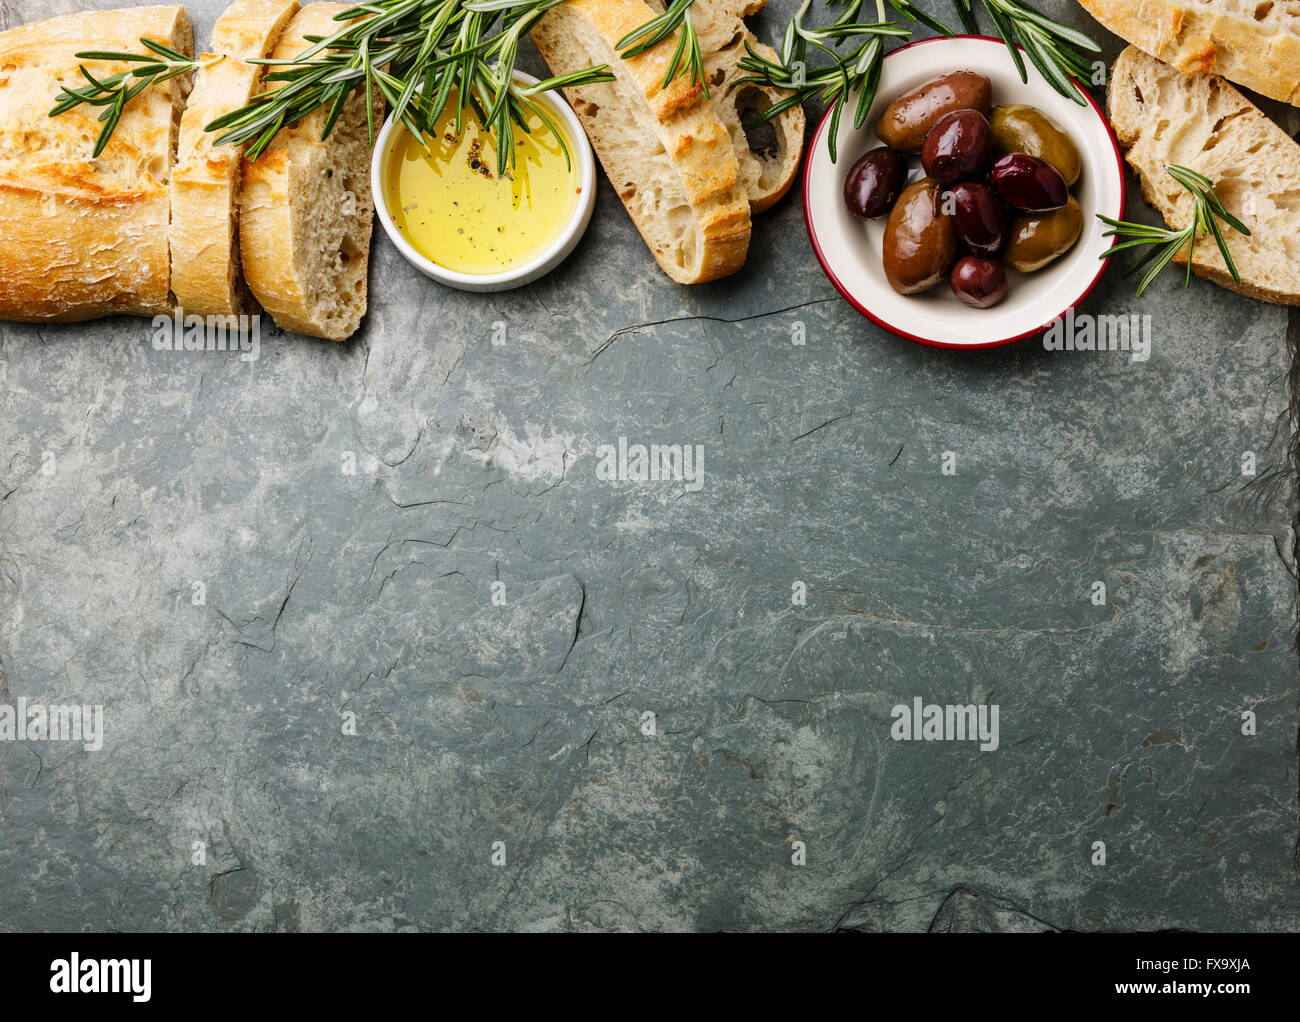 Italian food ingredients background with Sliced bread Ciabatta, olive oil, olives and rosemary on gray stone slate Stock Photo